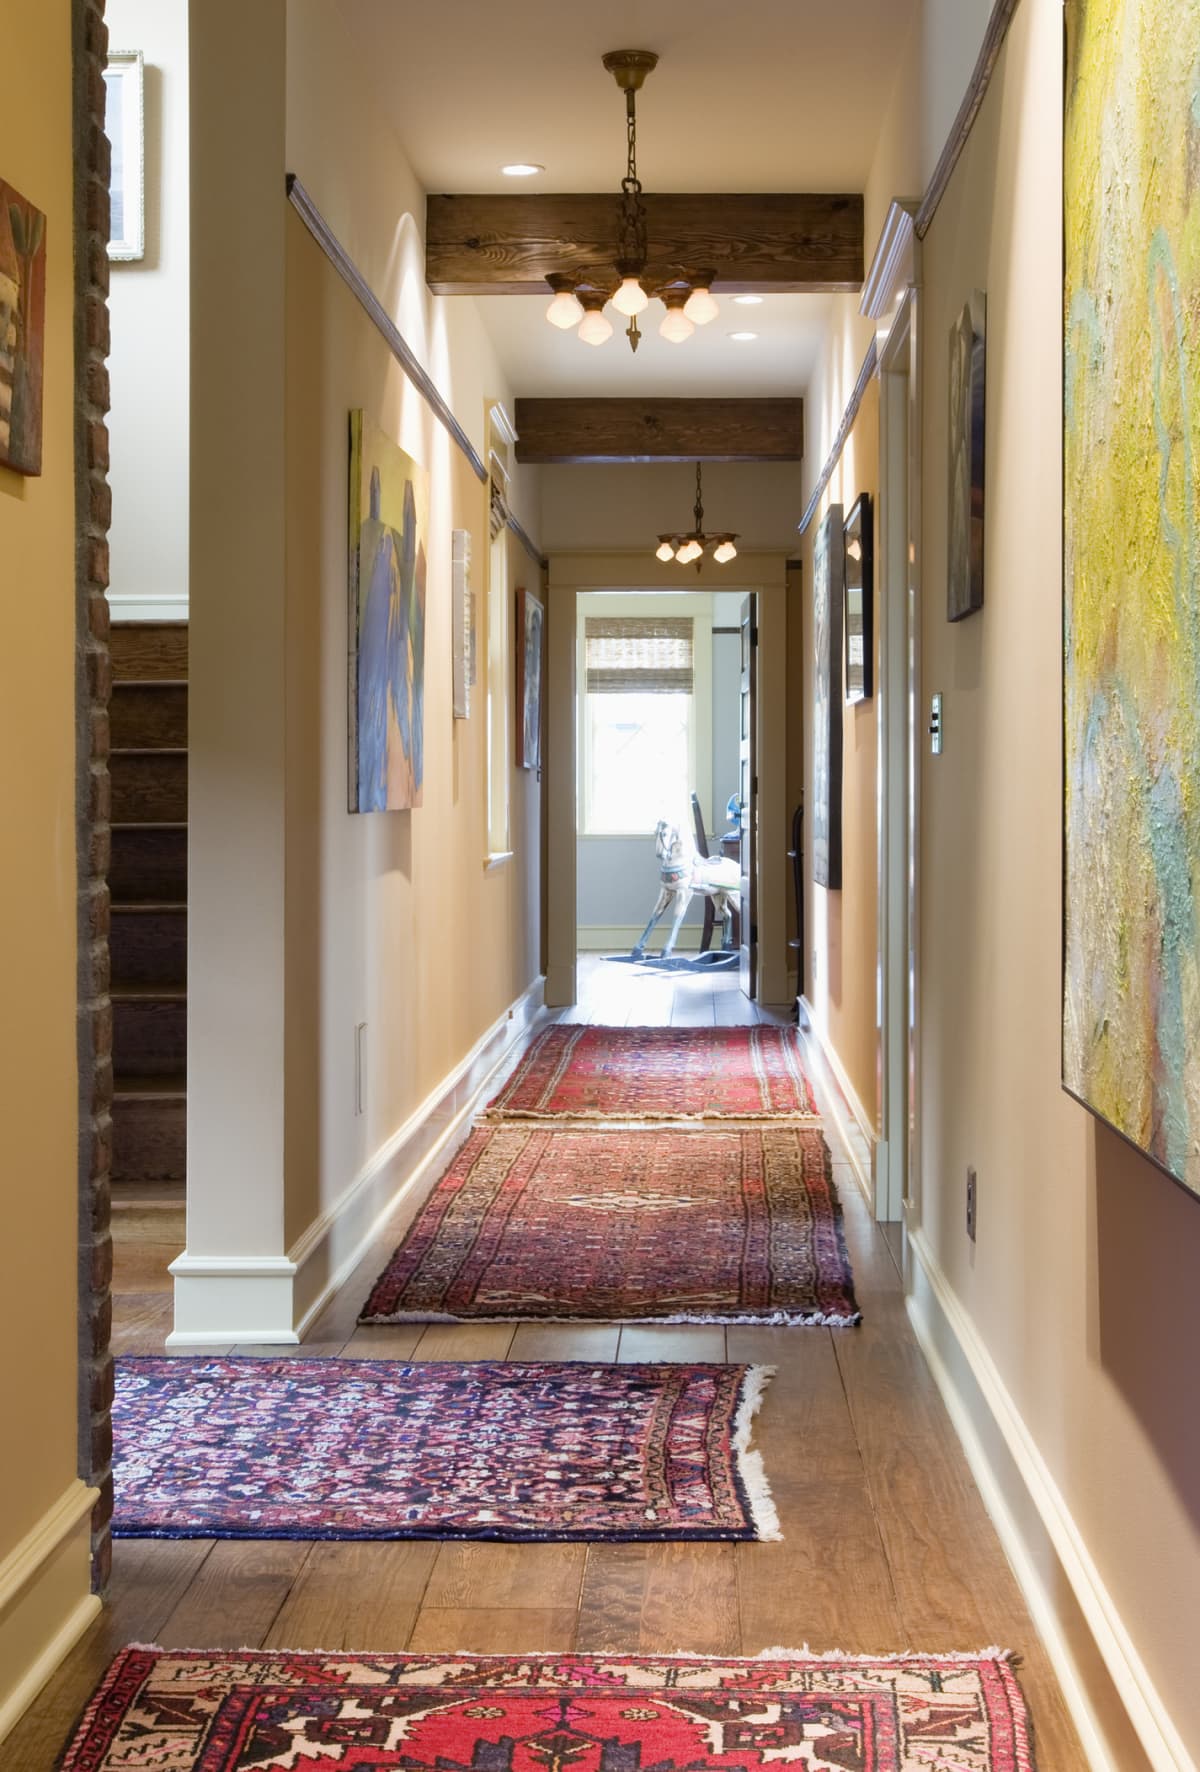 Hallway with artwork and rugs